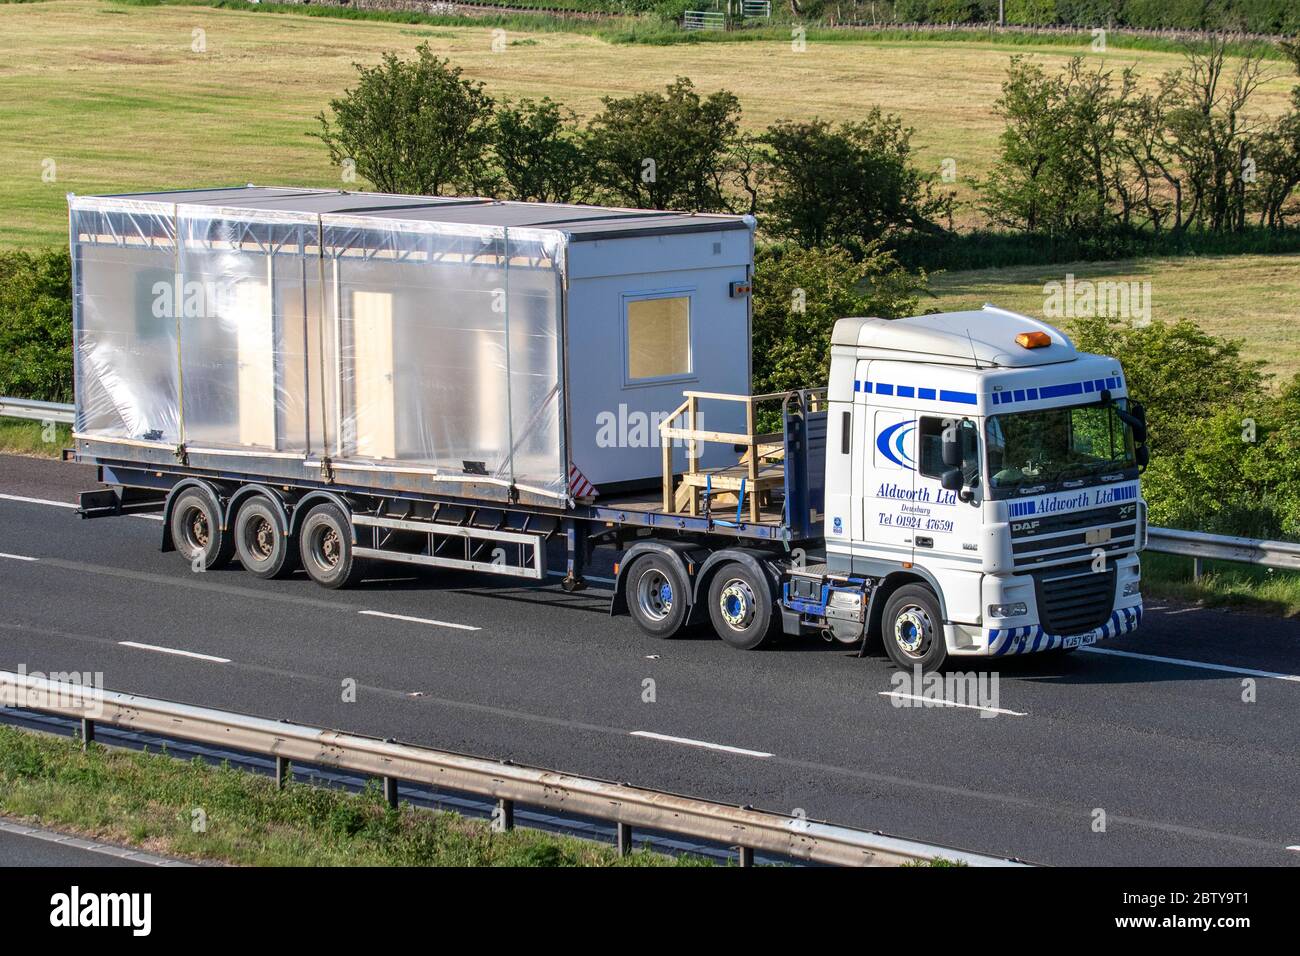 Aldworth Ltd Haulage delivery trucks, HGV lorry, transportation, articulated truck, Steel cabins, containers, modular buildings, flat pack offices, wheeled towable units, cargo carriers, DAF XF vehicle, European commercial transport industry HGV, M6 at Manchester, UK Stock Photo